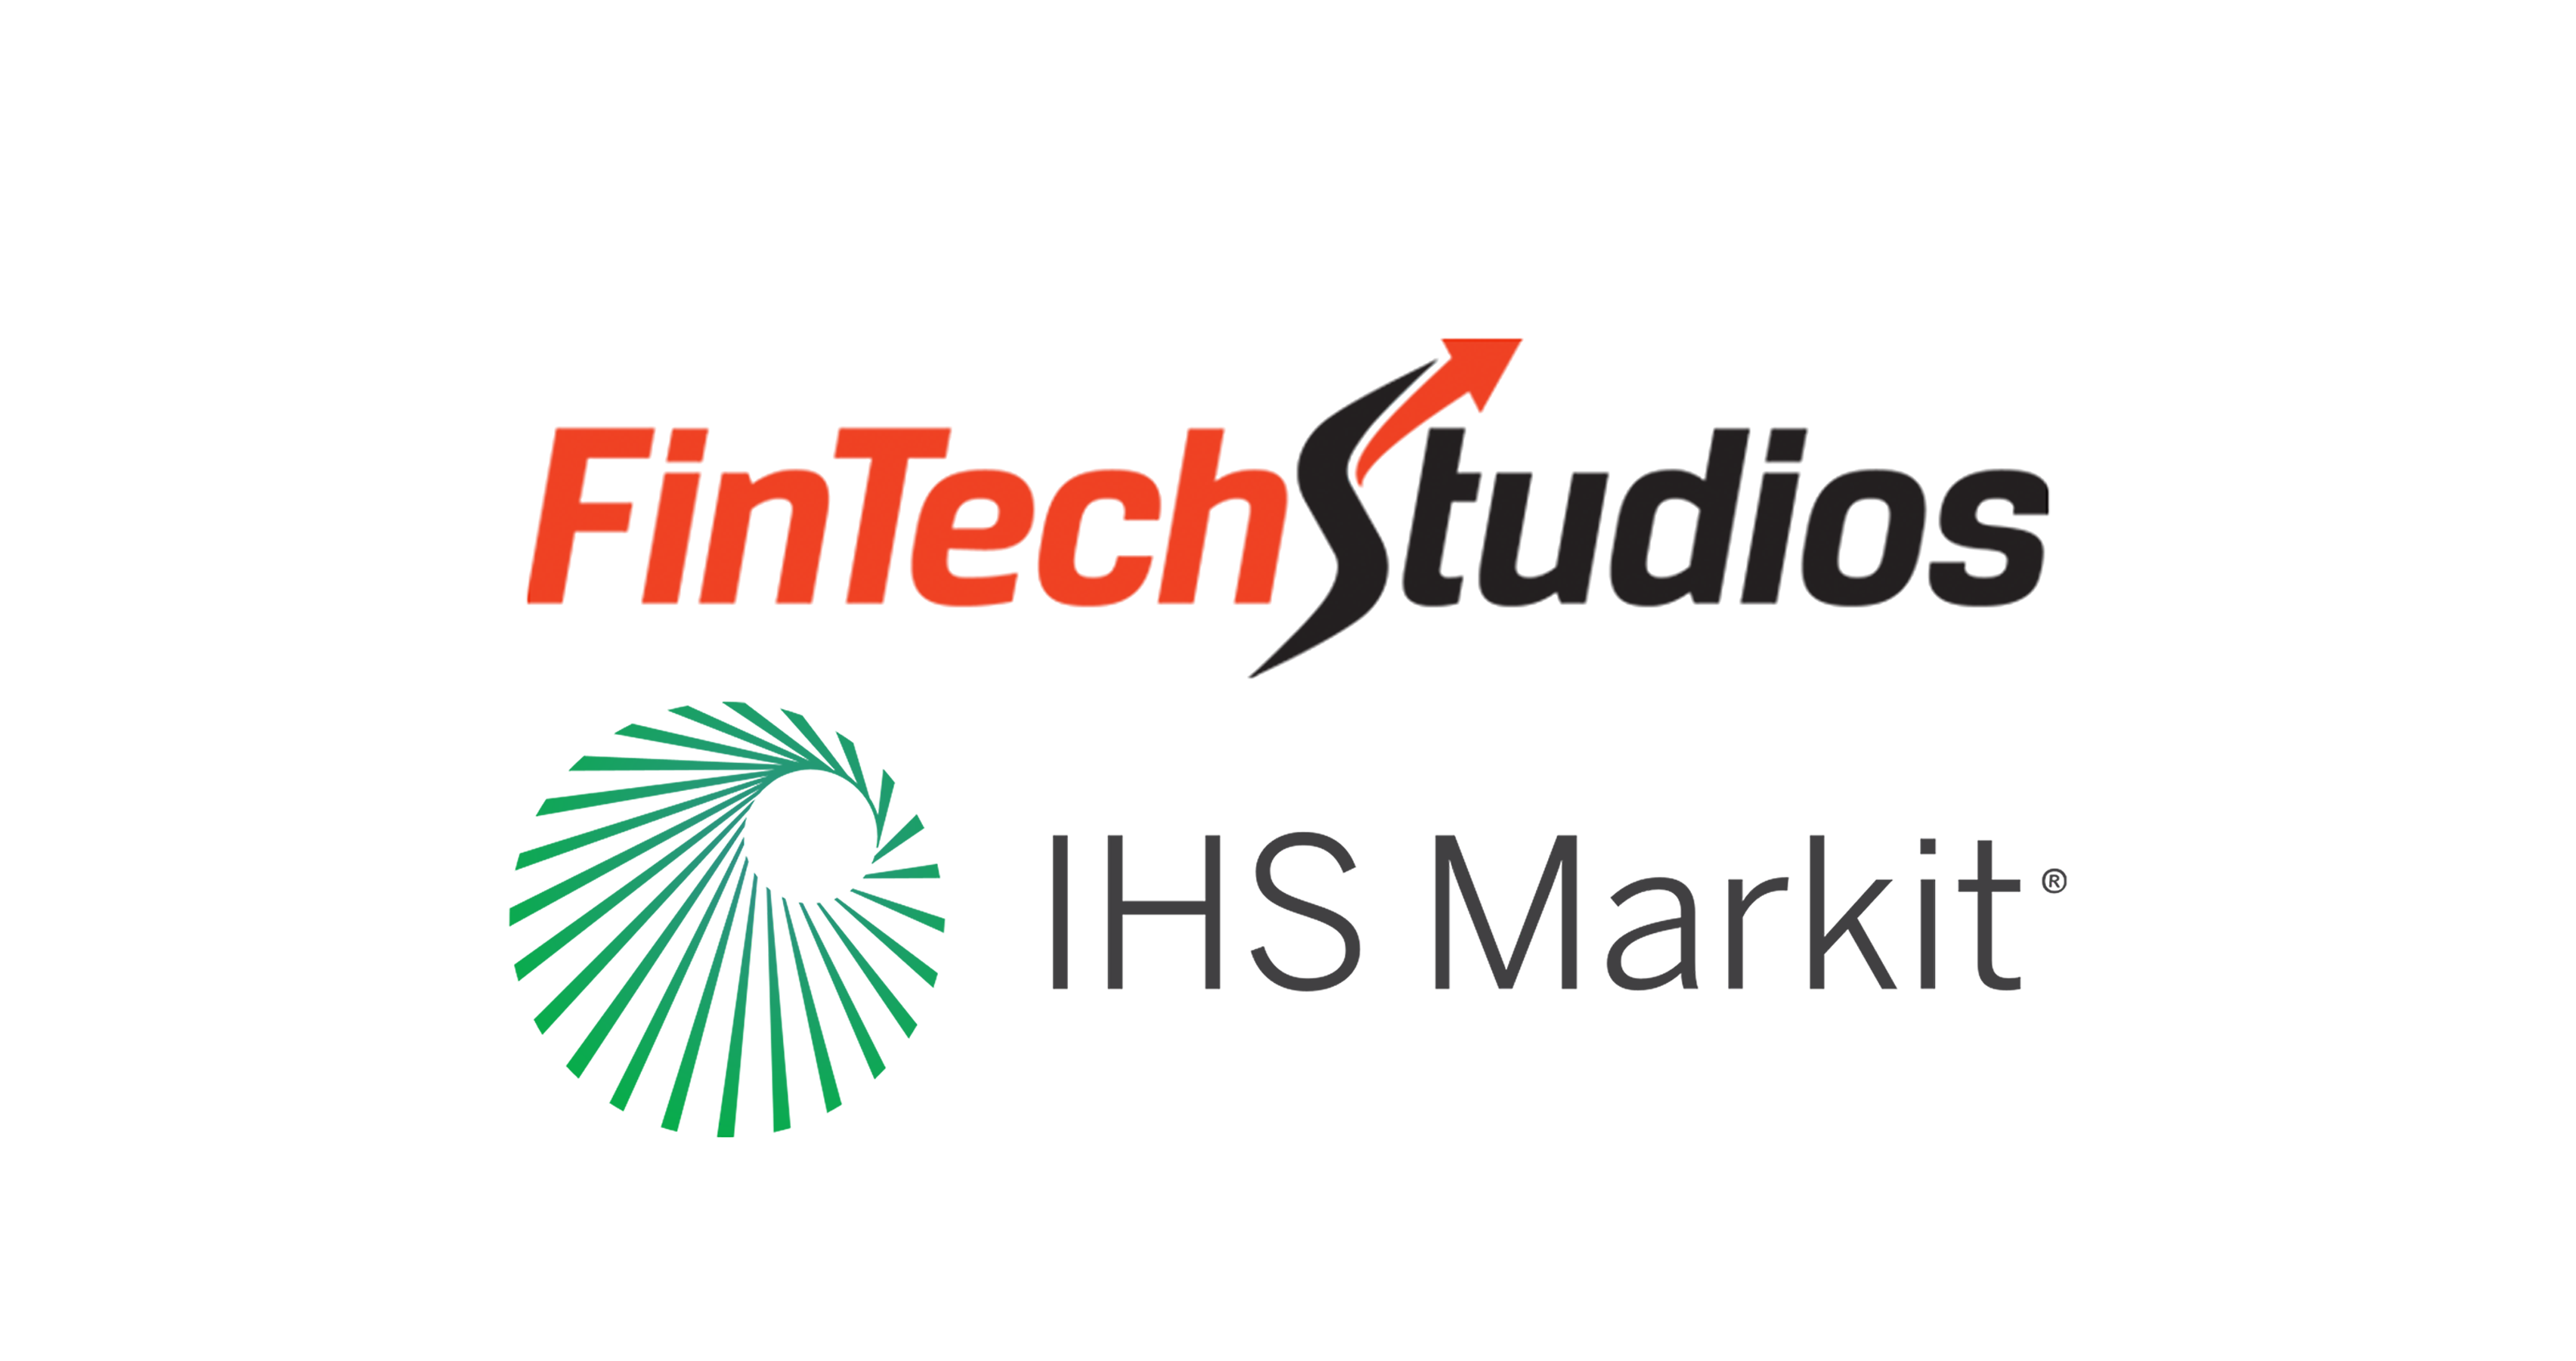 IHS Markit Partners with FinTech Studios to Deliver Curated Real-time Market Intelligence within thinkFolio